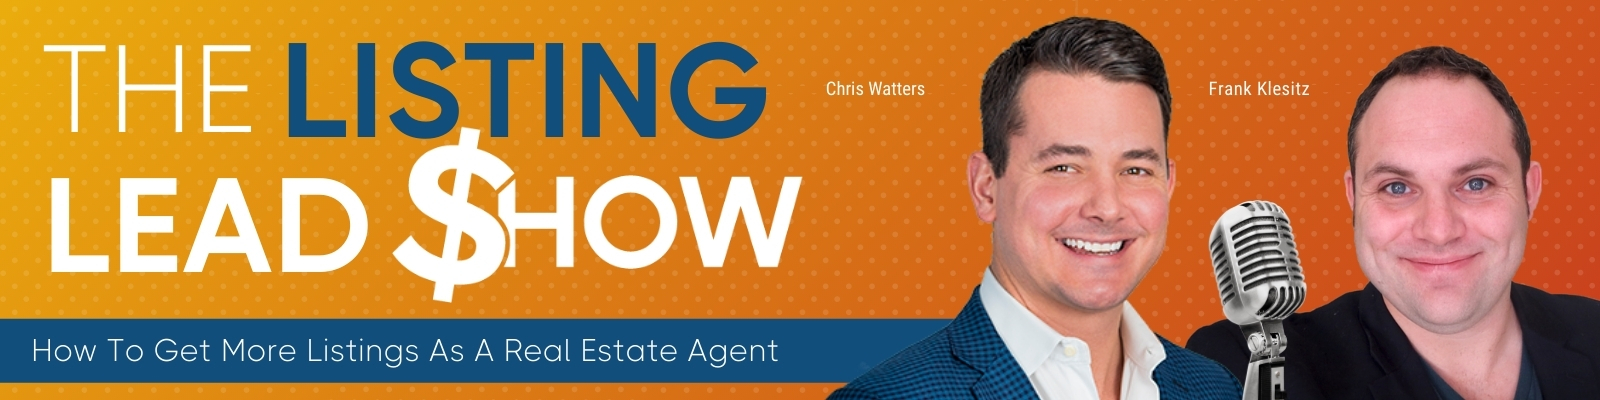 The Listing Lead Show